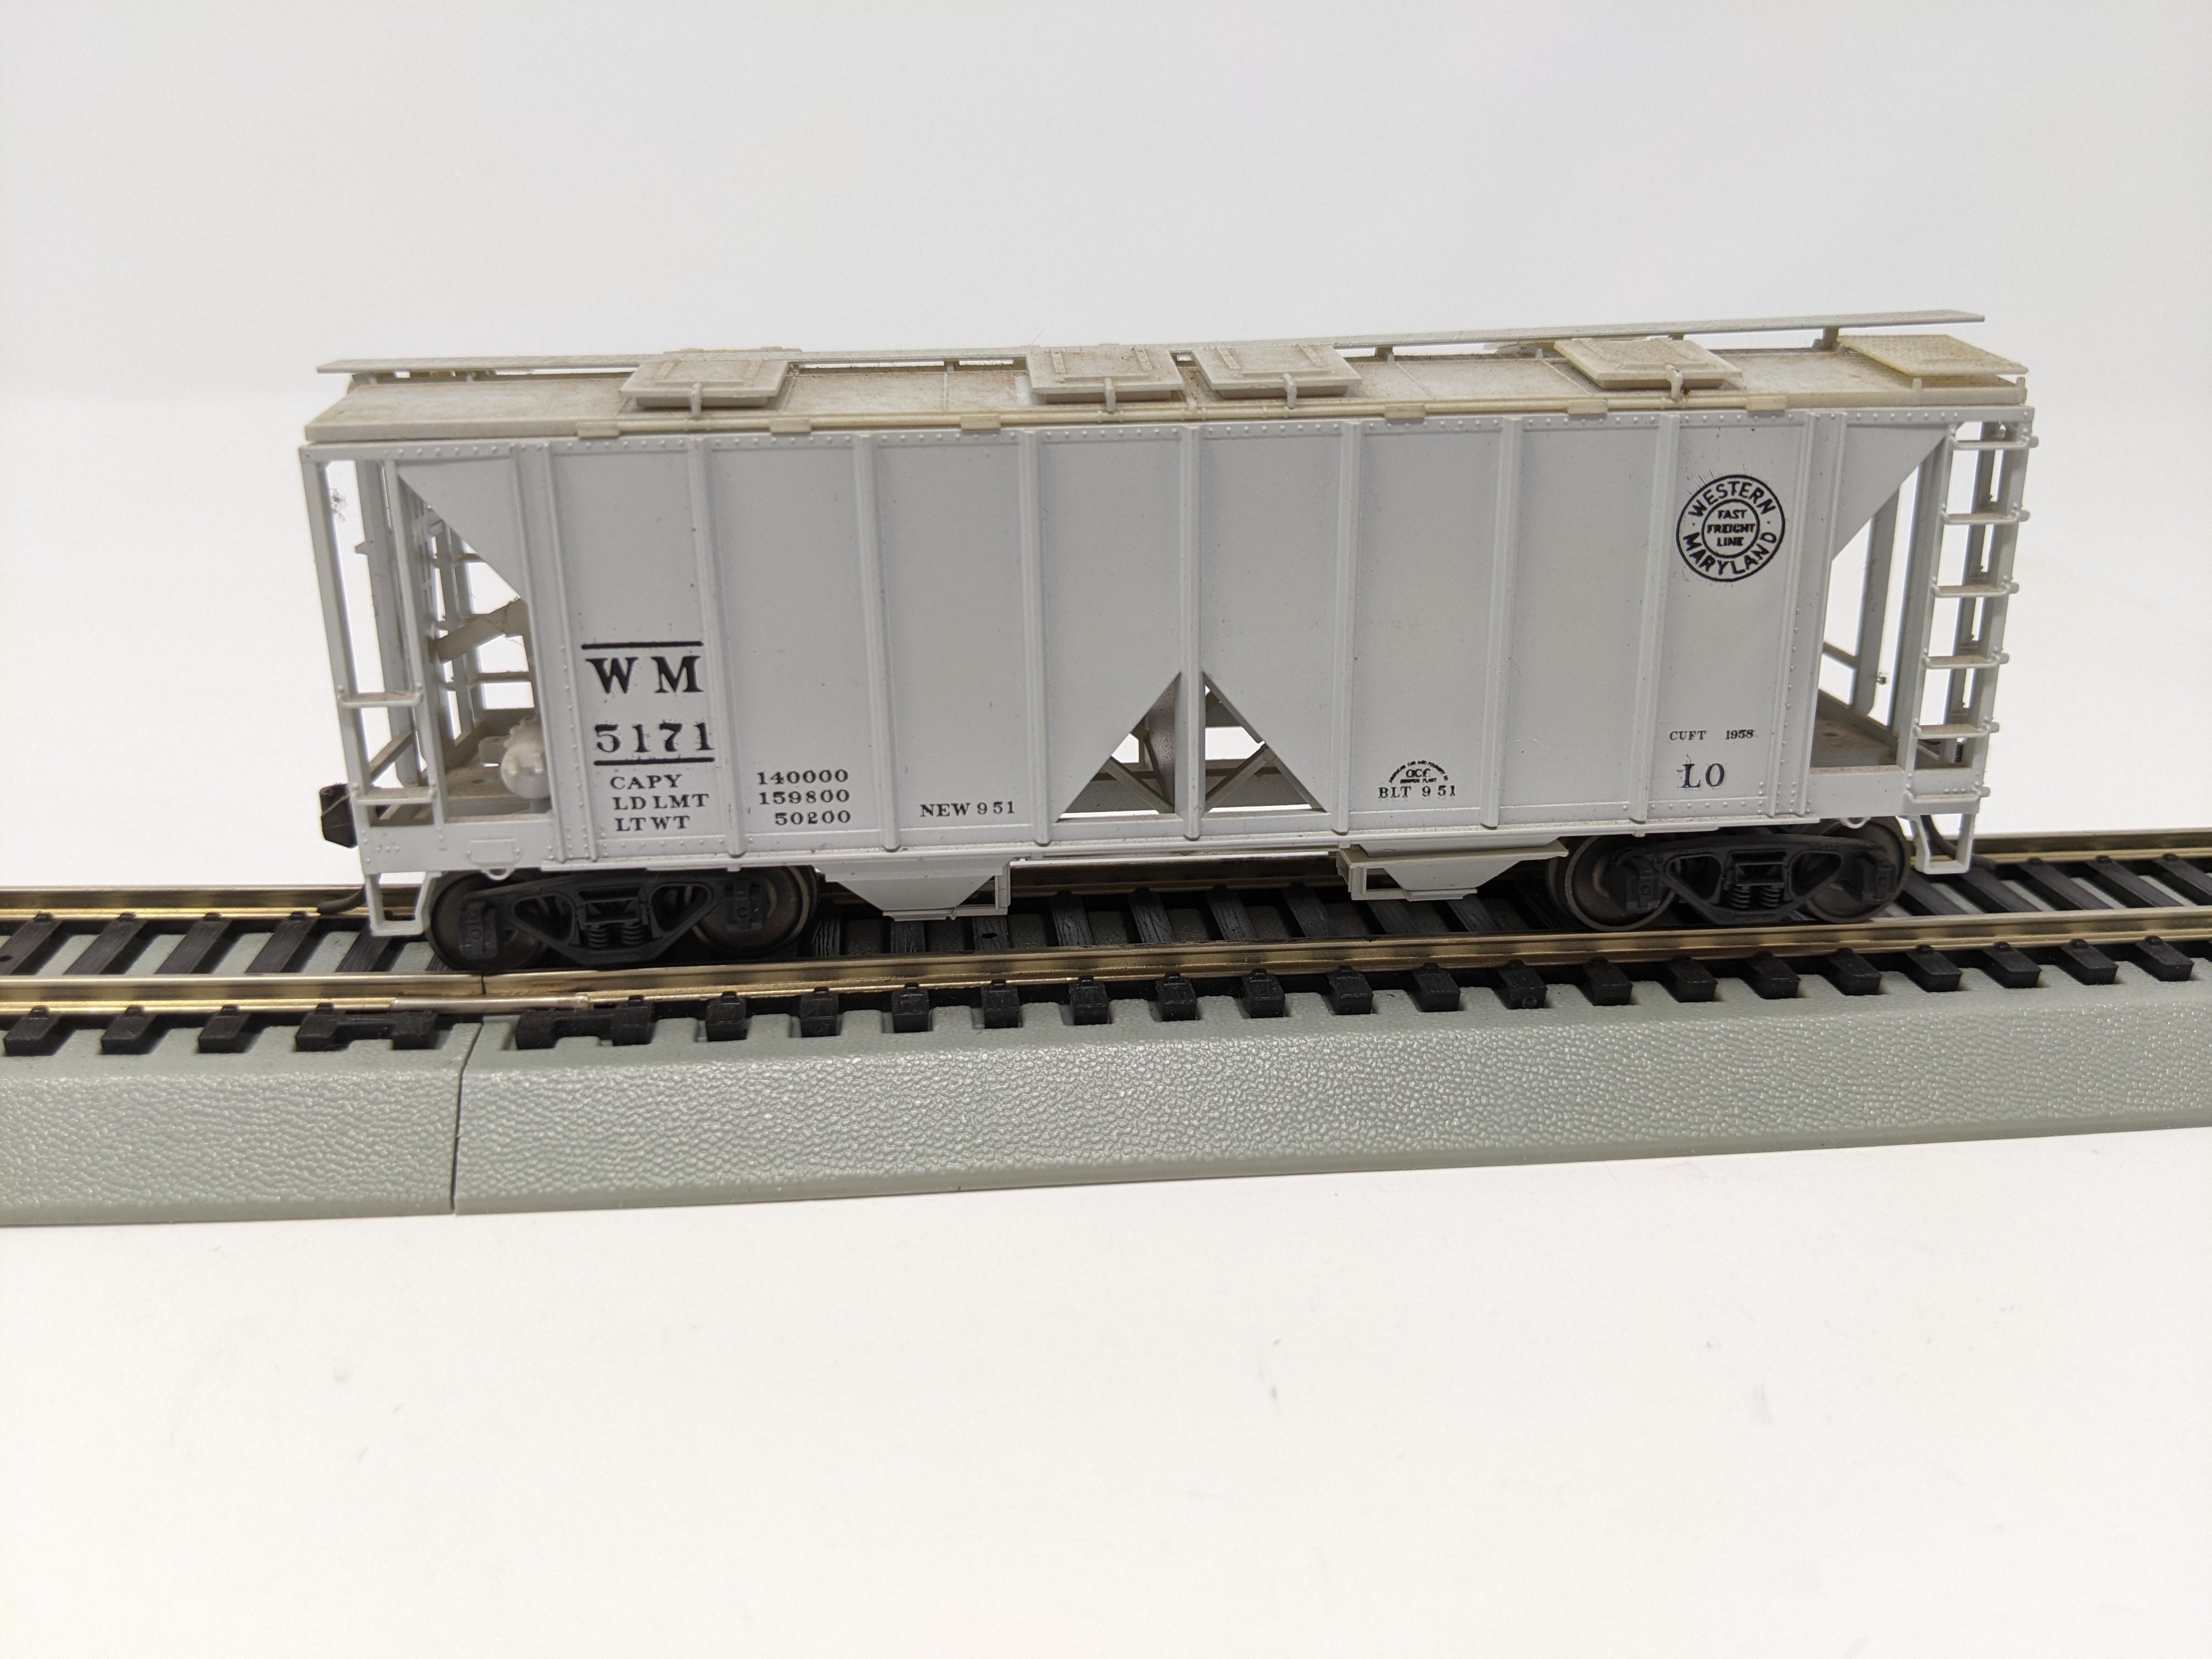 USED Bowser HO Scale, 70 Ton Covered Hopper, Western Maryland WM #5171, Read Description